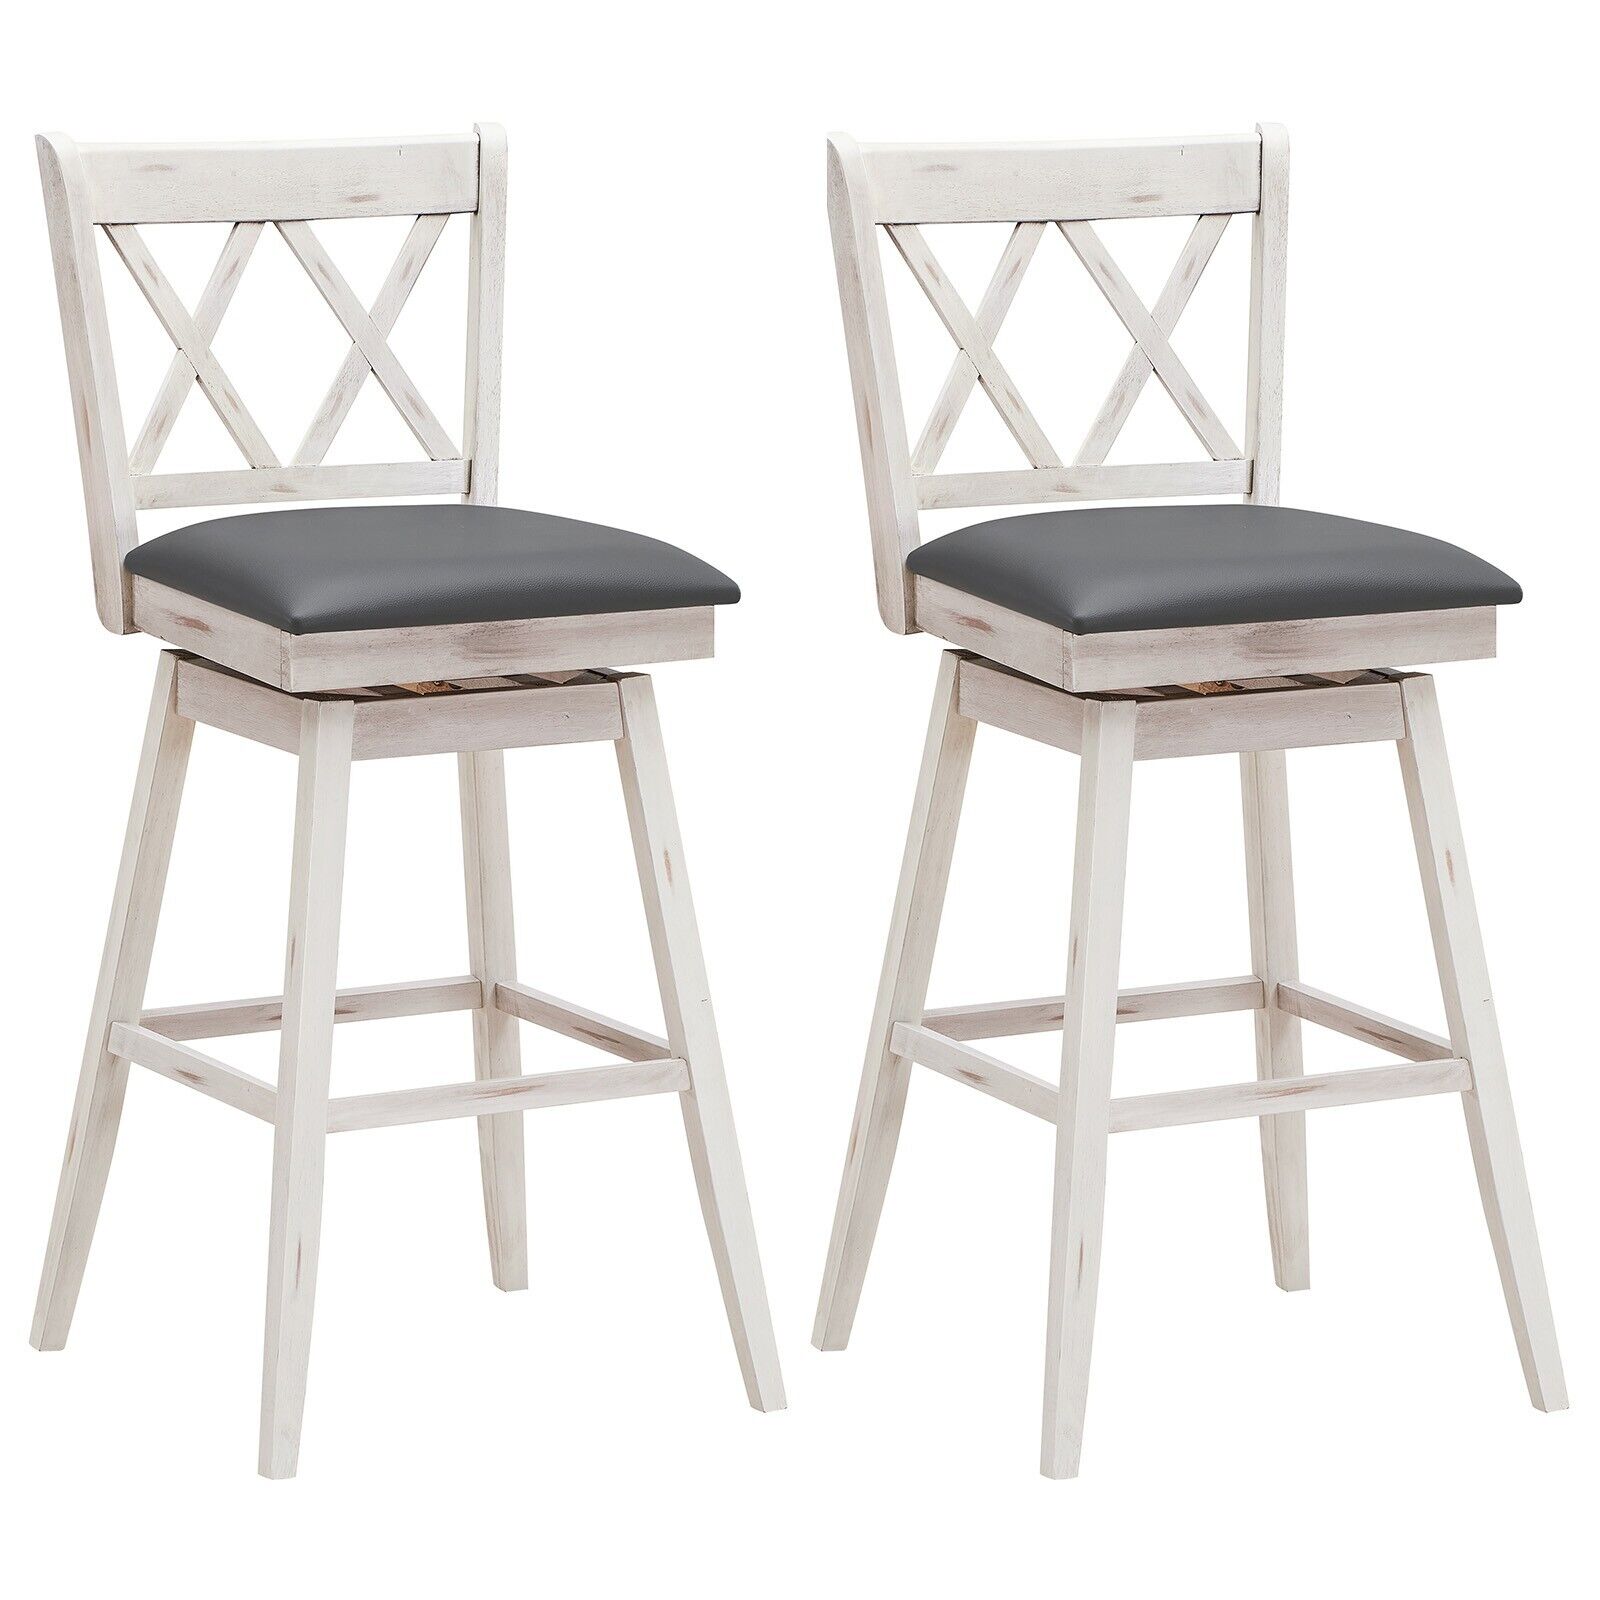 Set of 2 Counter Height Bar Stool with Foot Rest Upholstered Cushion-White